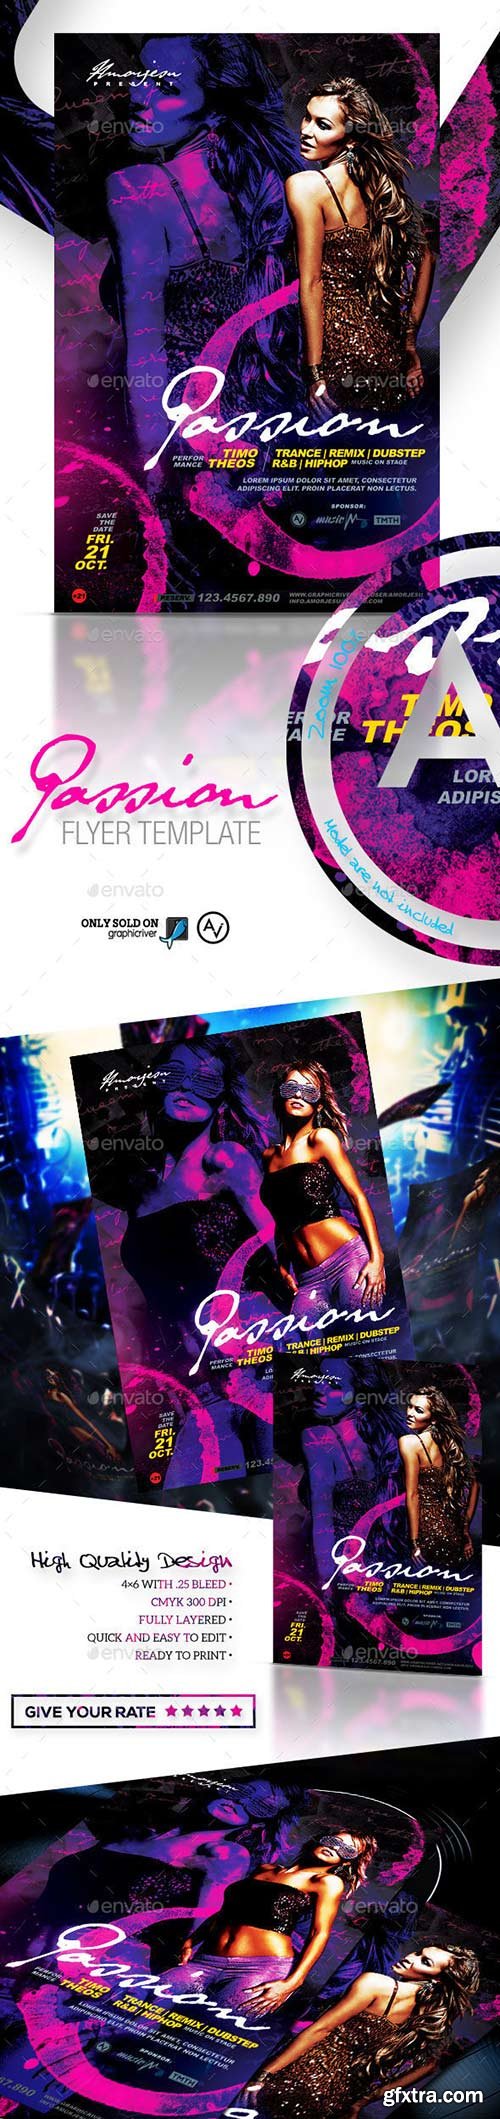 Graphicriver - Passion Flyer Template 12047025